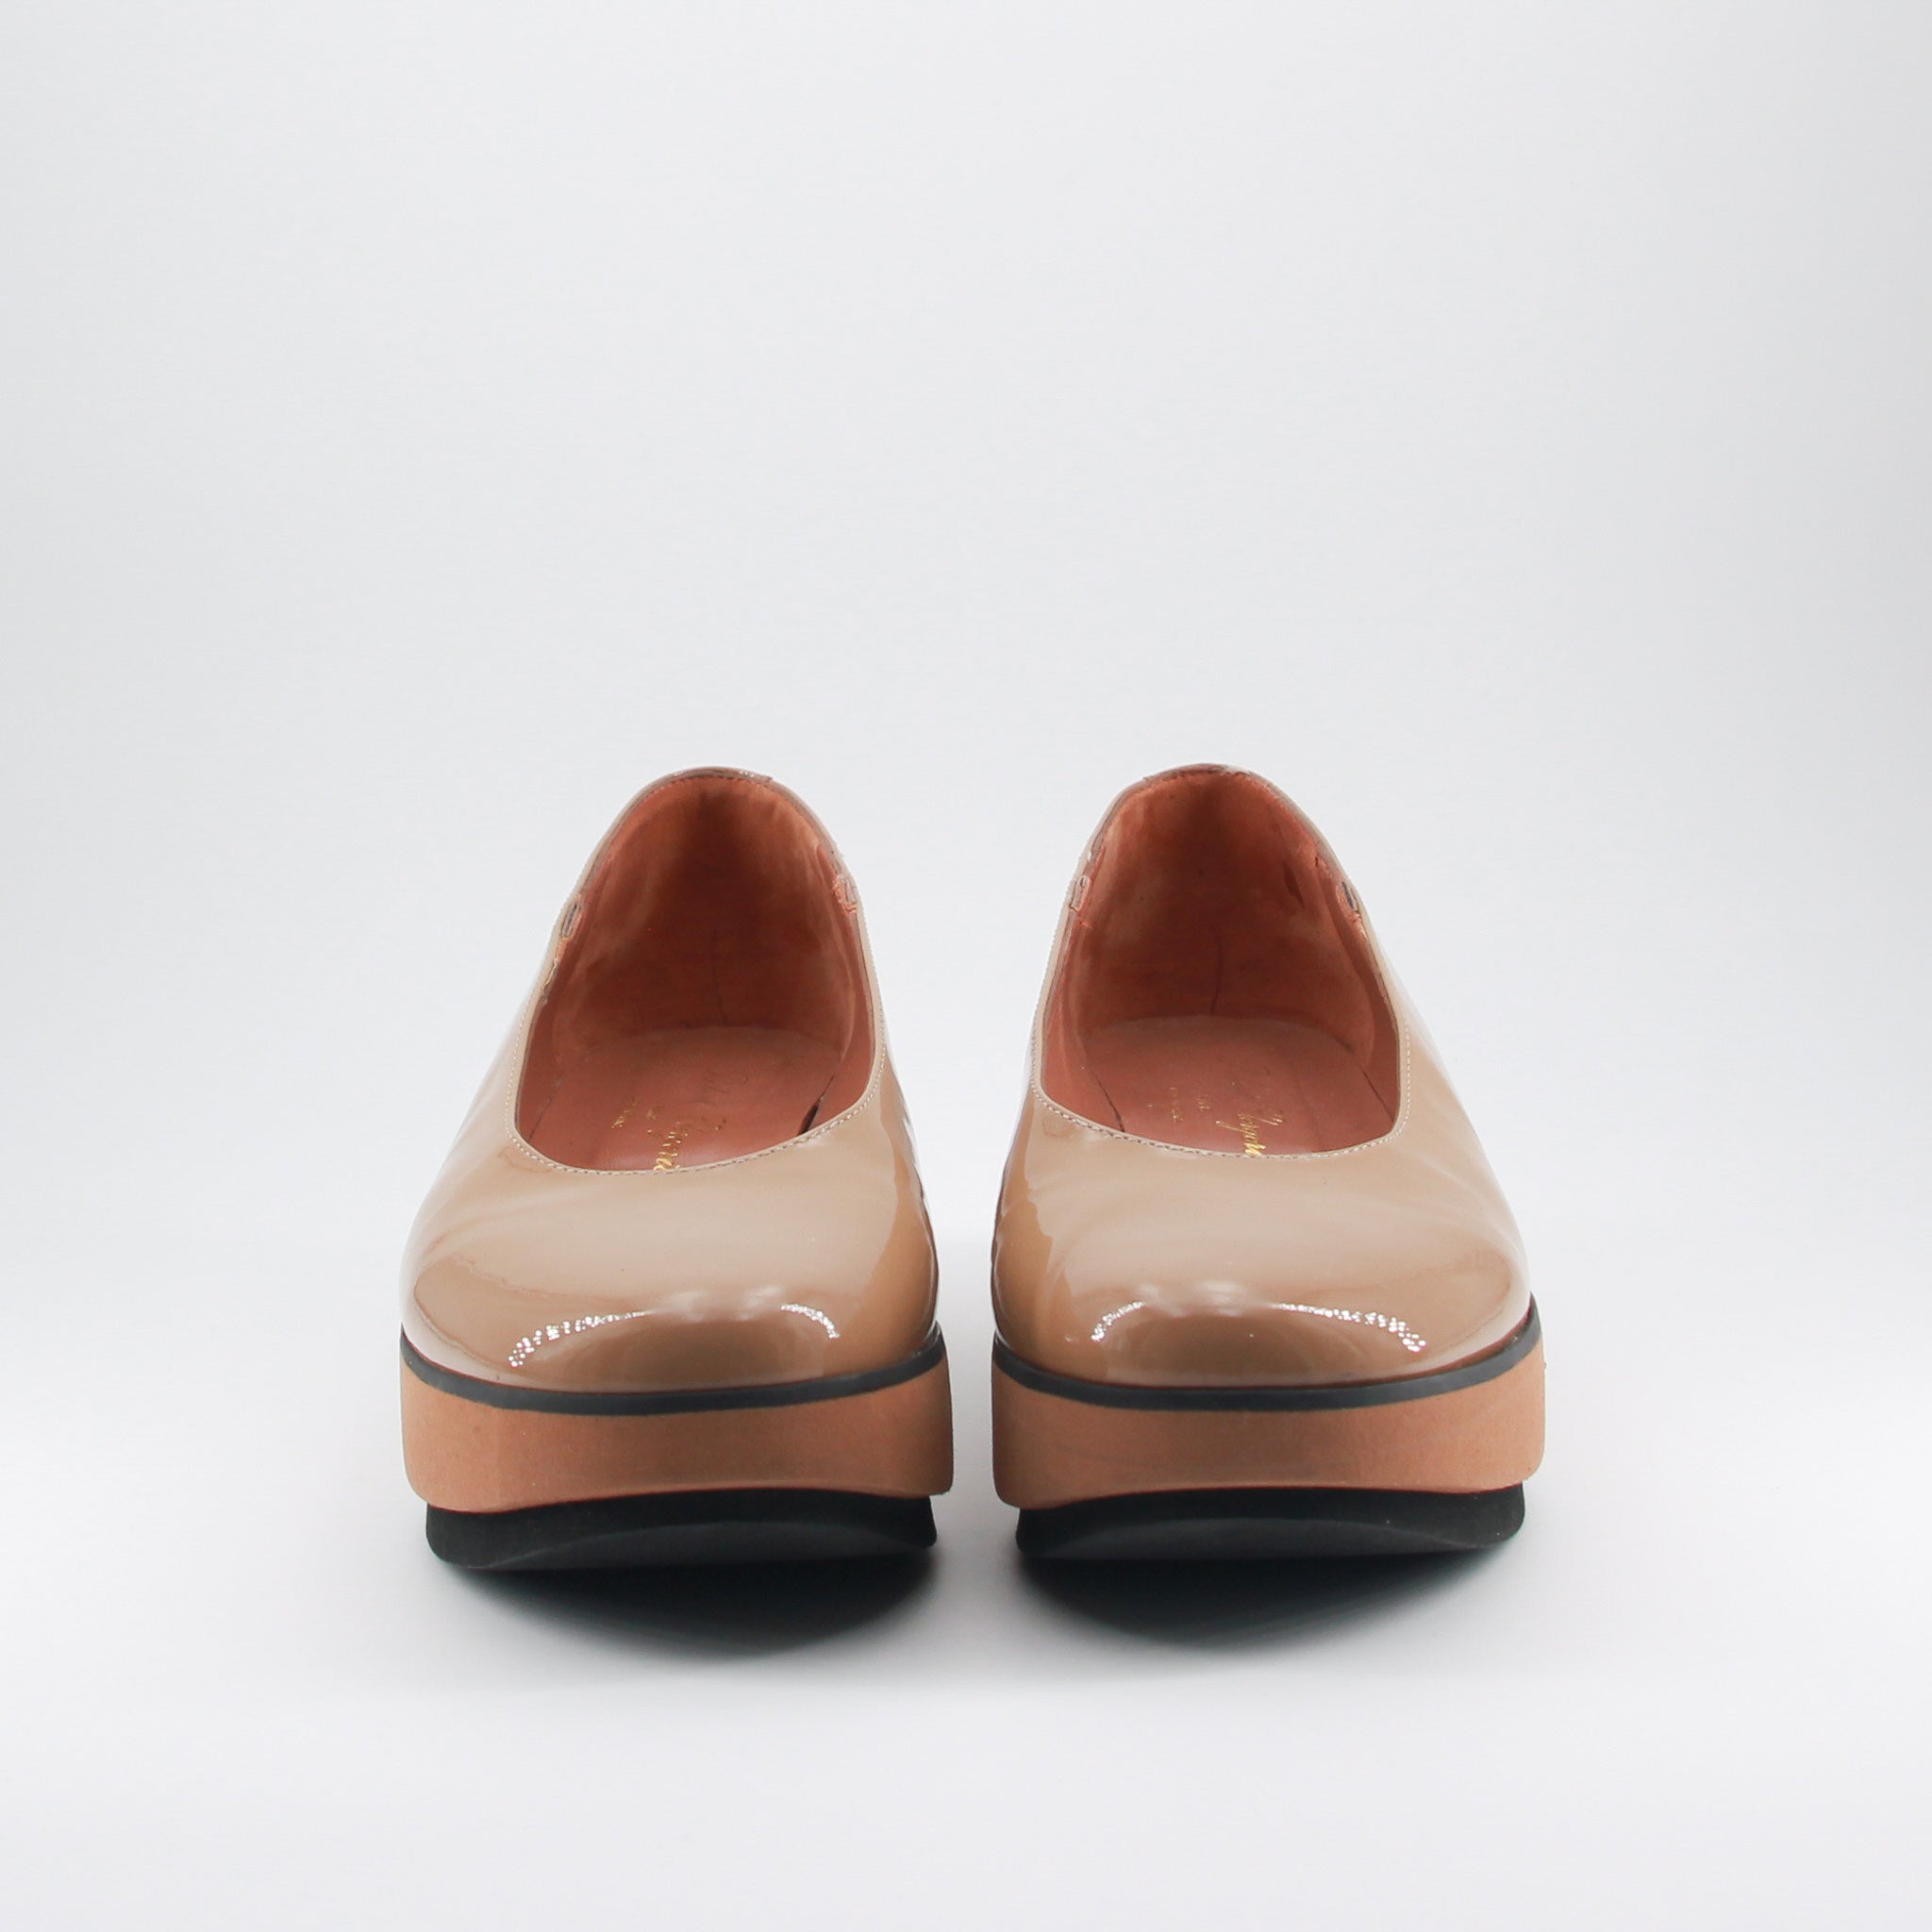 ballerines ballerinas ballet slippers CLERGERIE beige nude cuir verni patent leather the tiger twist house of bichonnage chaussure de luxe luxury shoes seconde main second hand rénovée renovated cordonnerie repair annecy